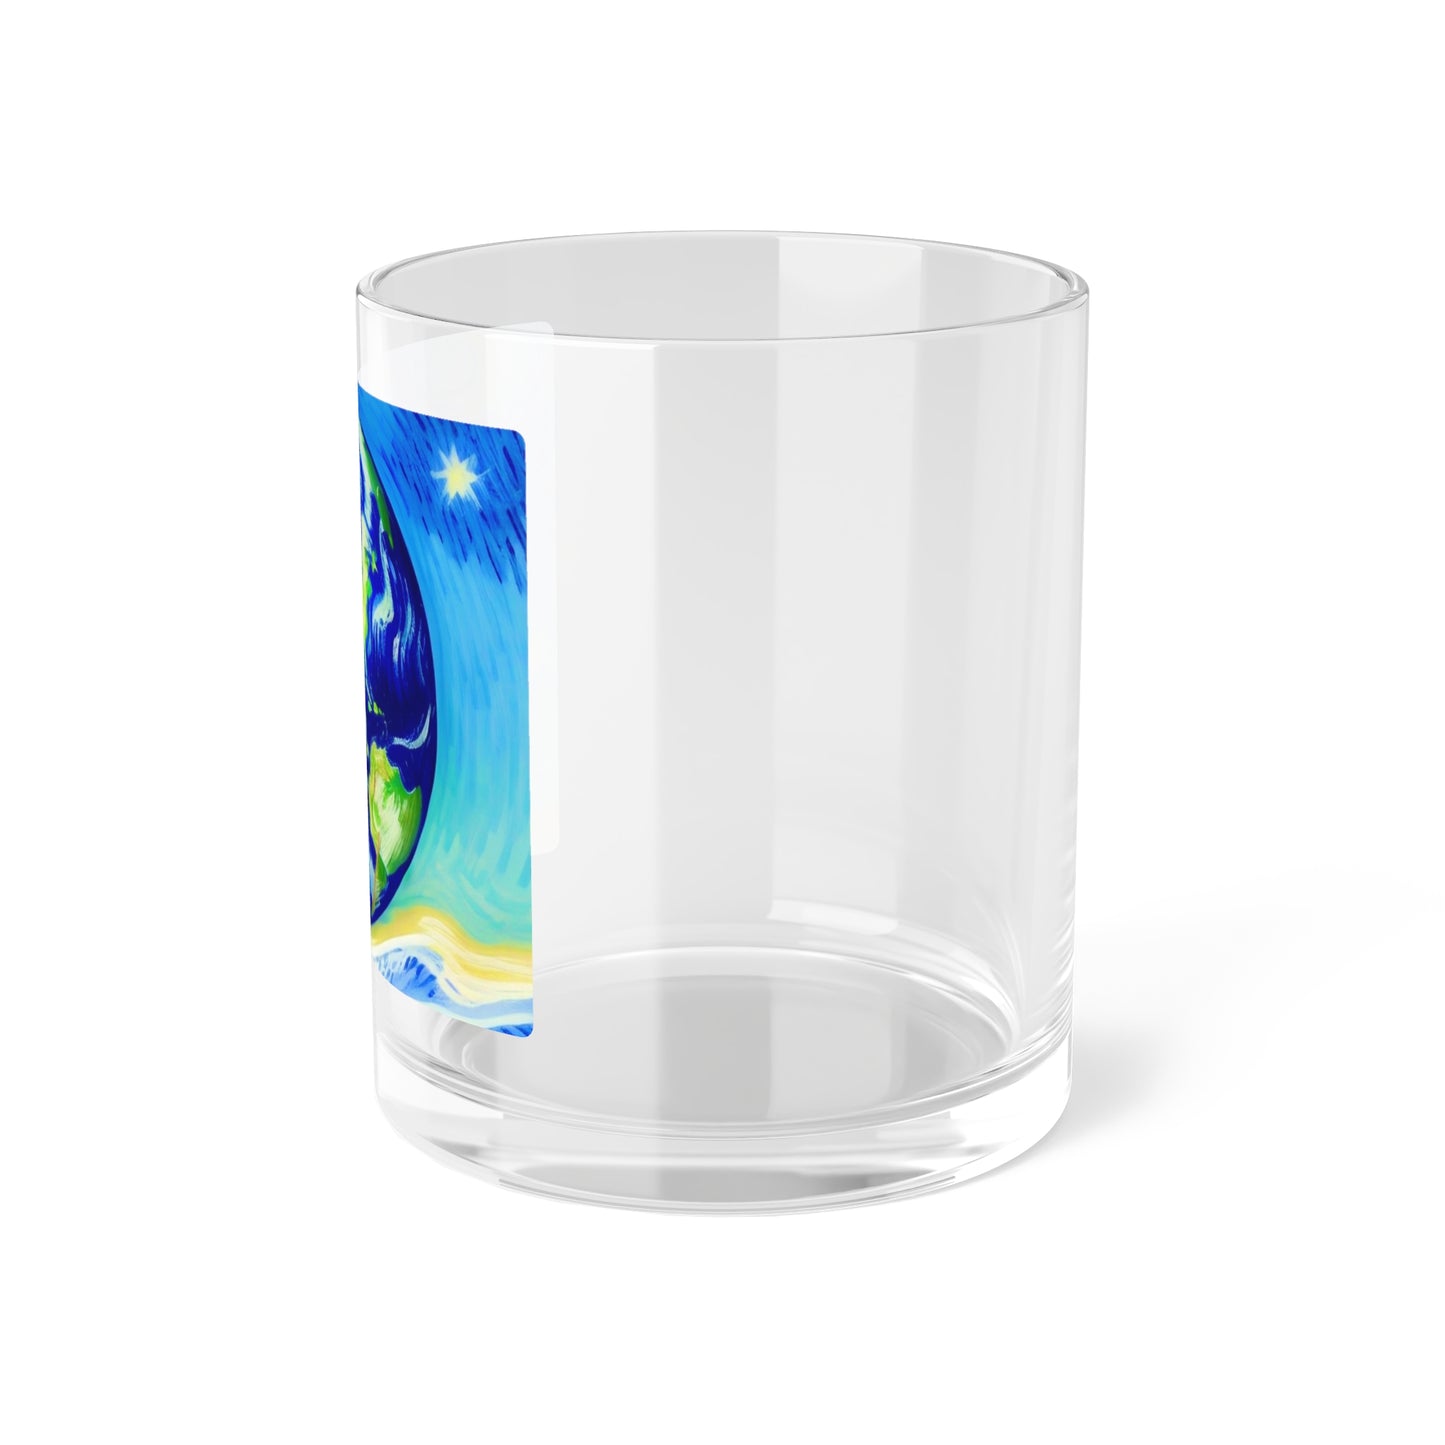 Mother Earth Cocktail Party Beverage Entertaining Bar Glass